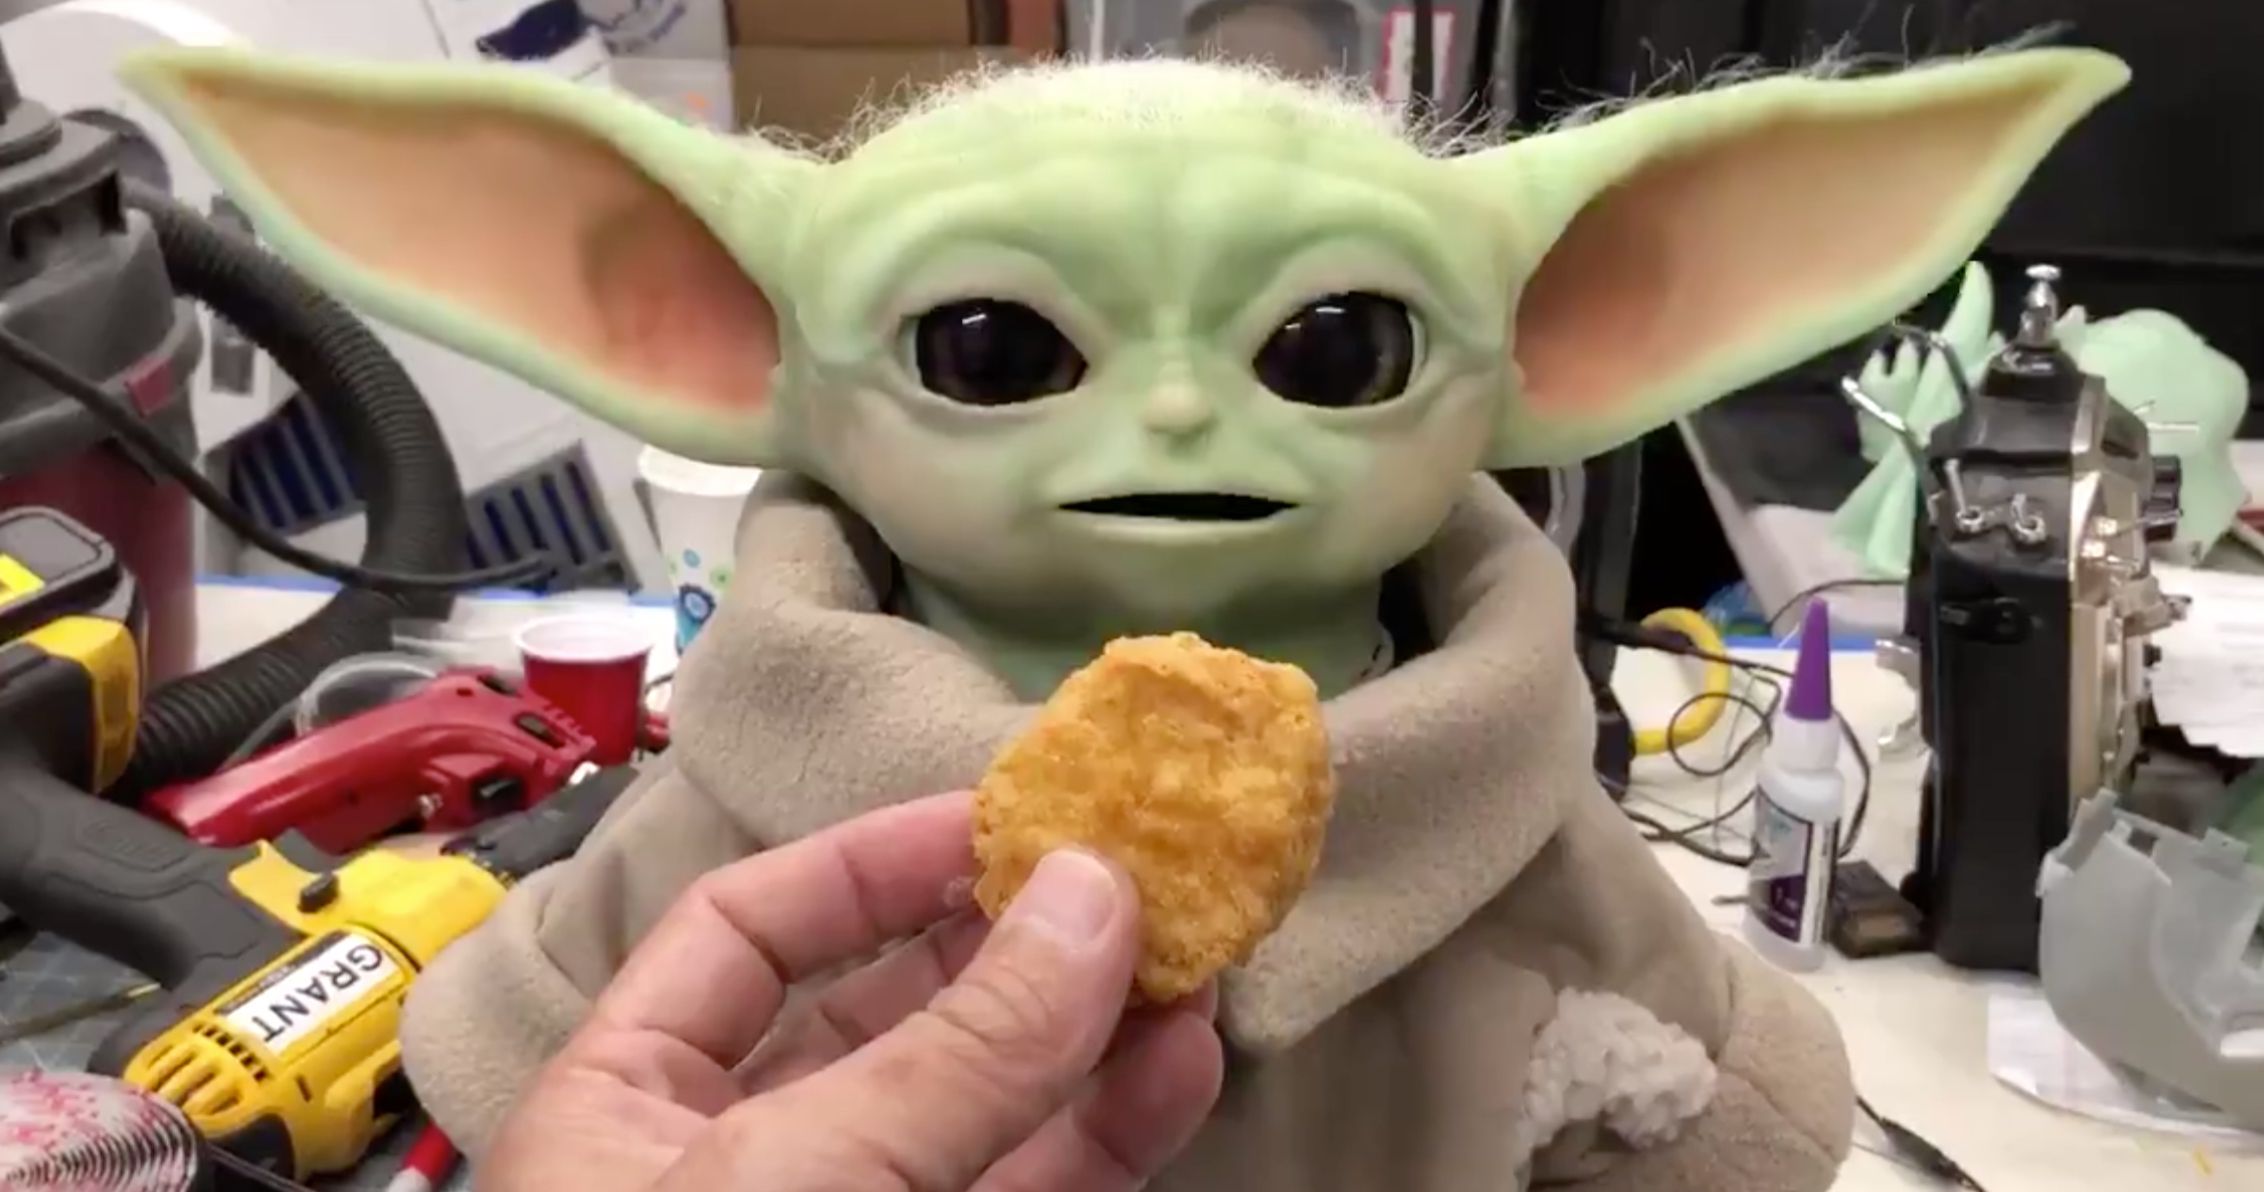 You'll Believe Baby Yoda Is Alive with Former Mythbuster's Realistic Animatronic